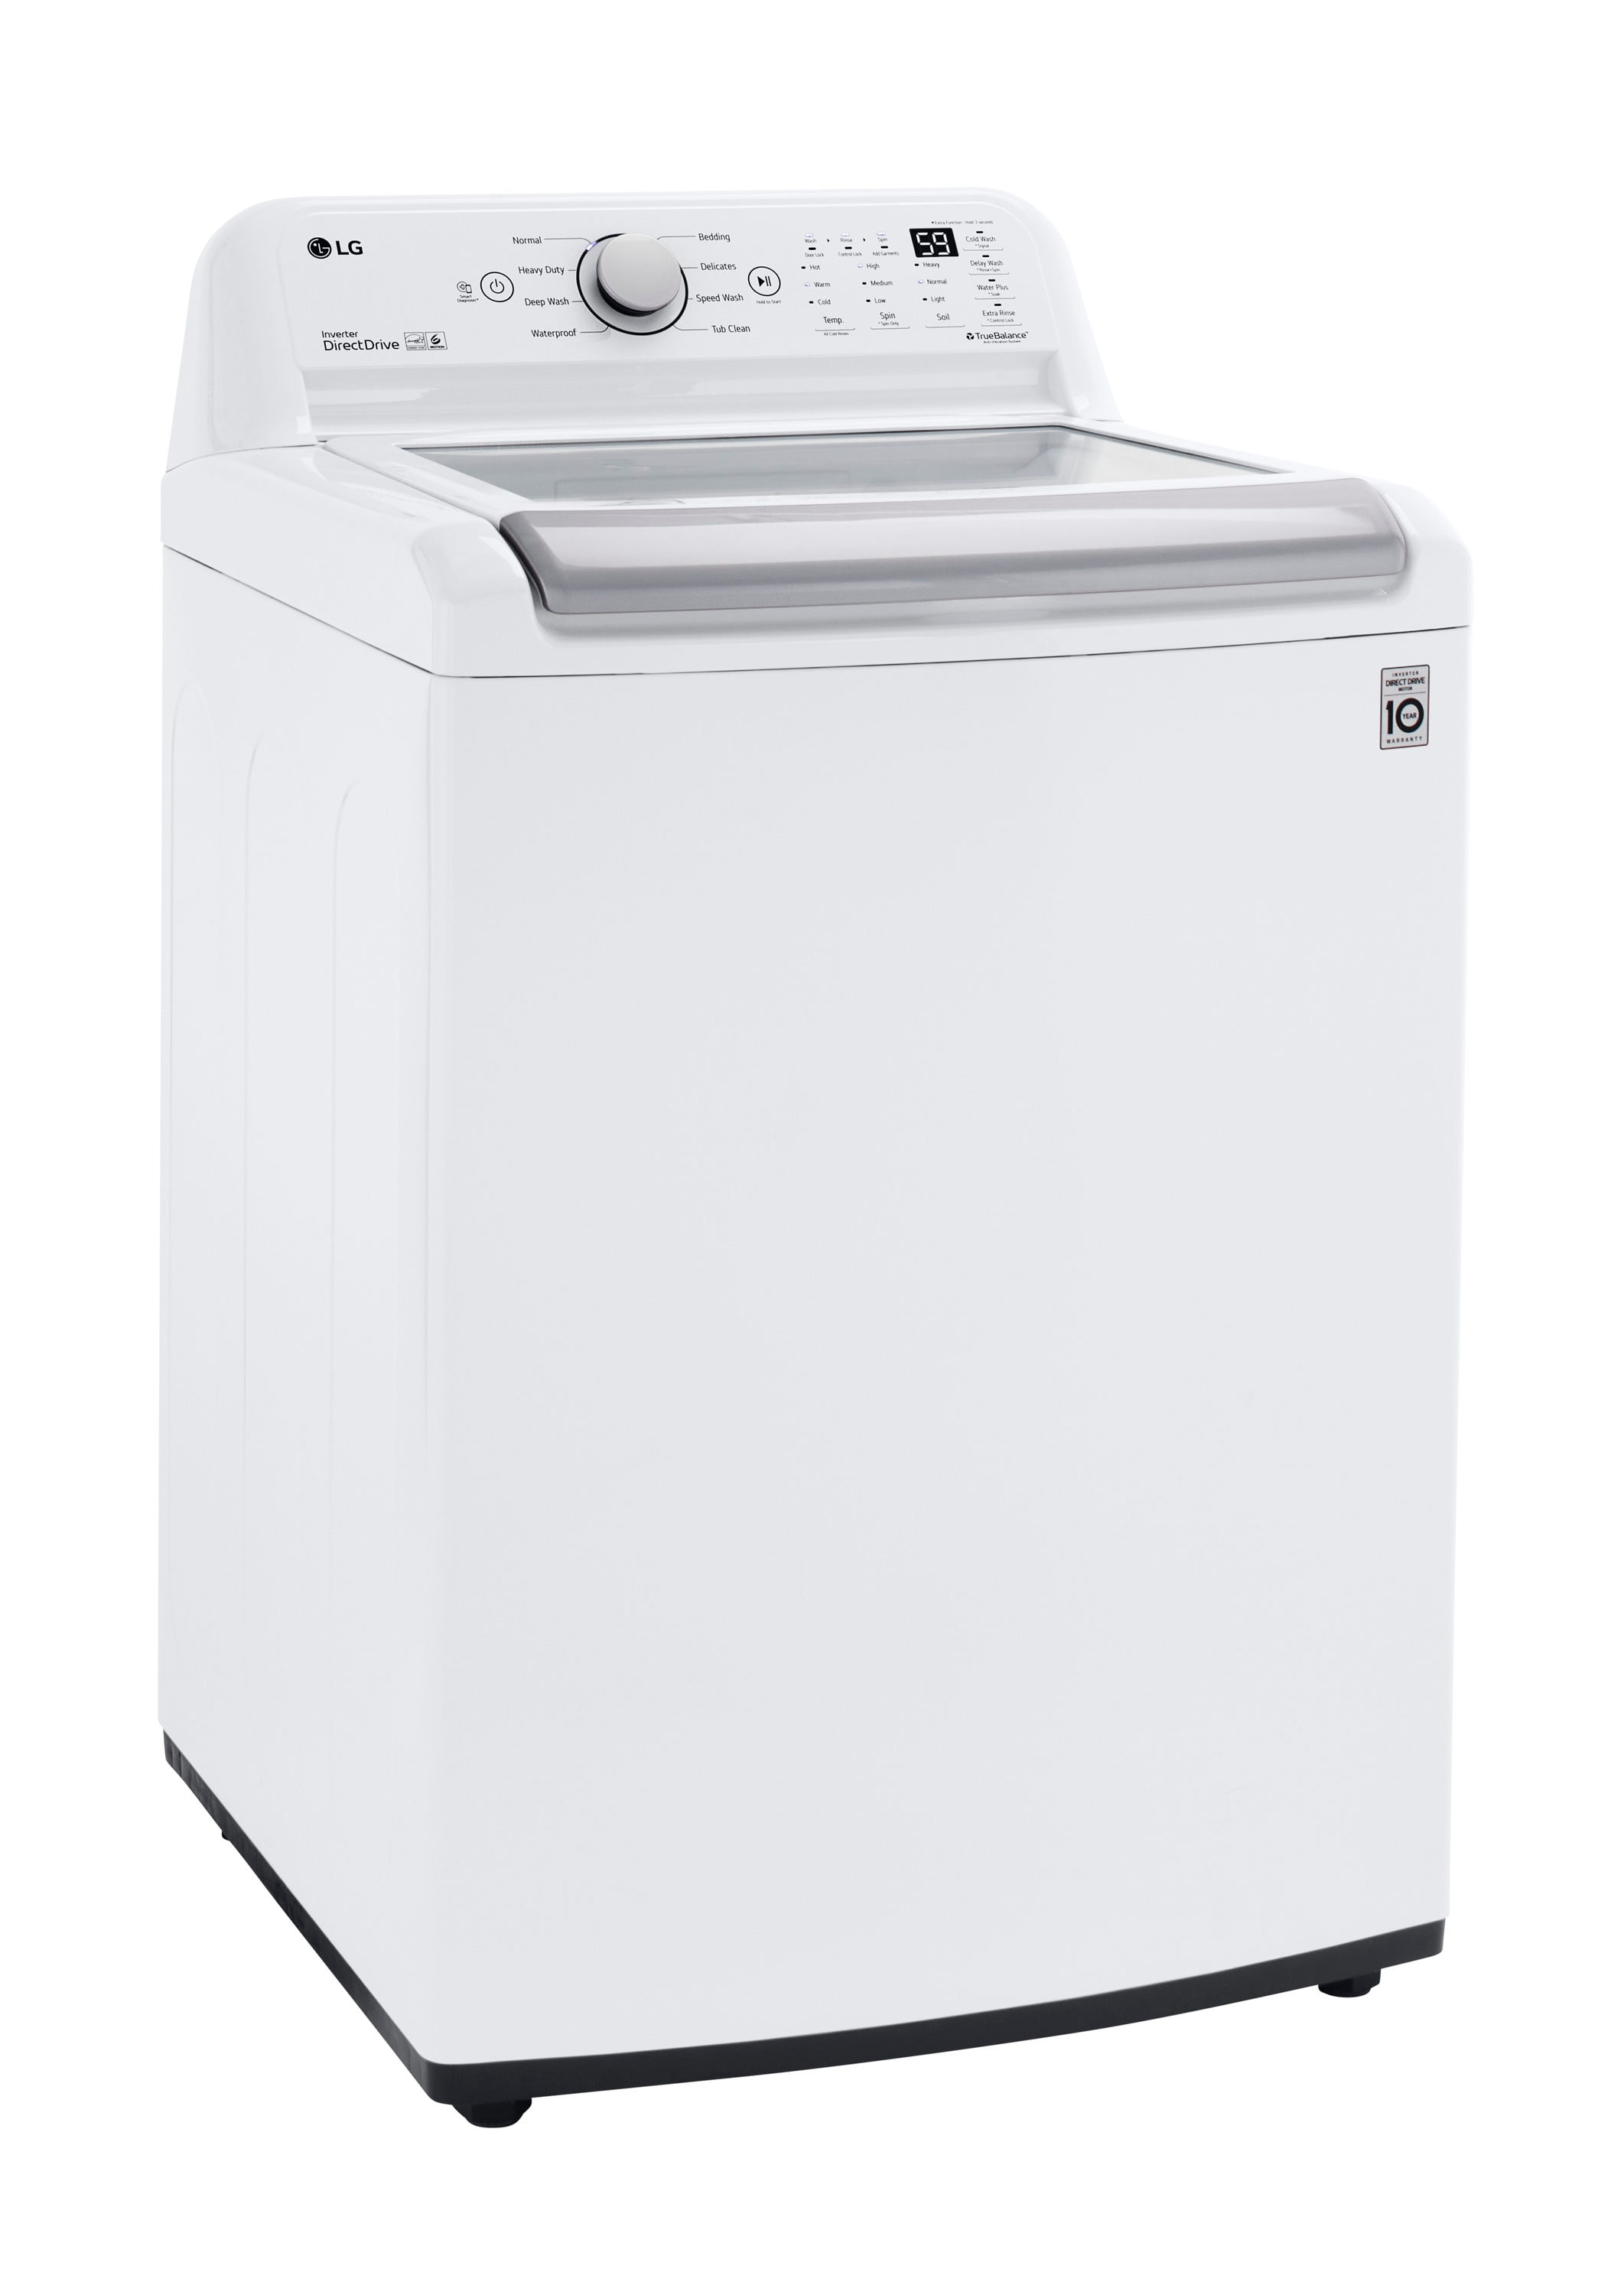 LG ColdWash 5-cu ft High Efficiency Impeller Top-Load Washer (White) ENERGY  STAR in the Top-Load Washers department at